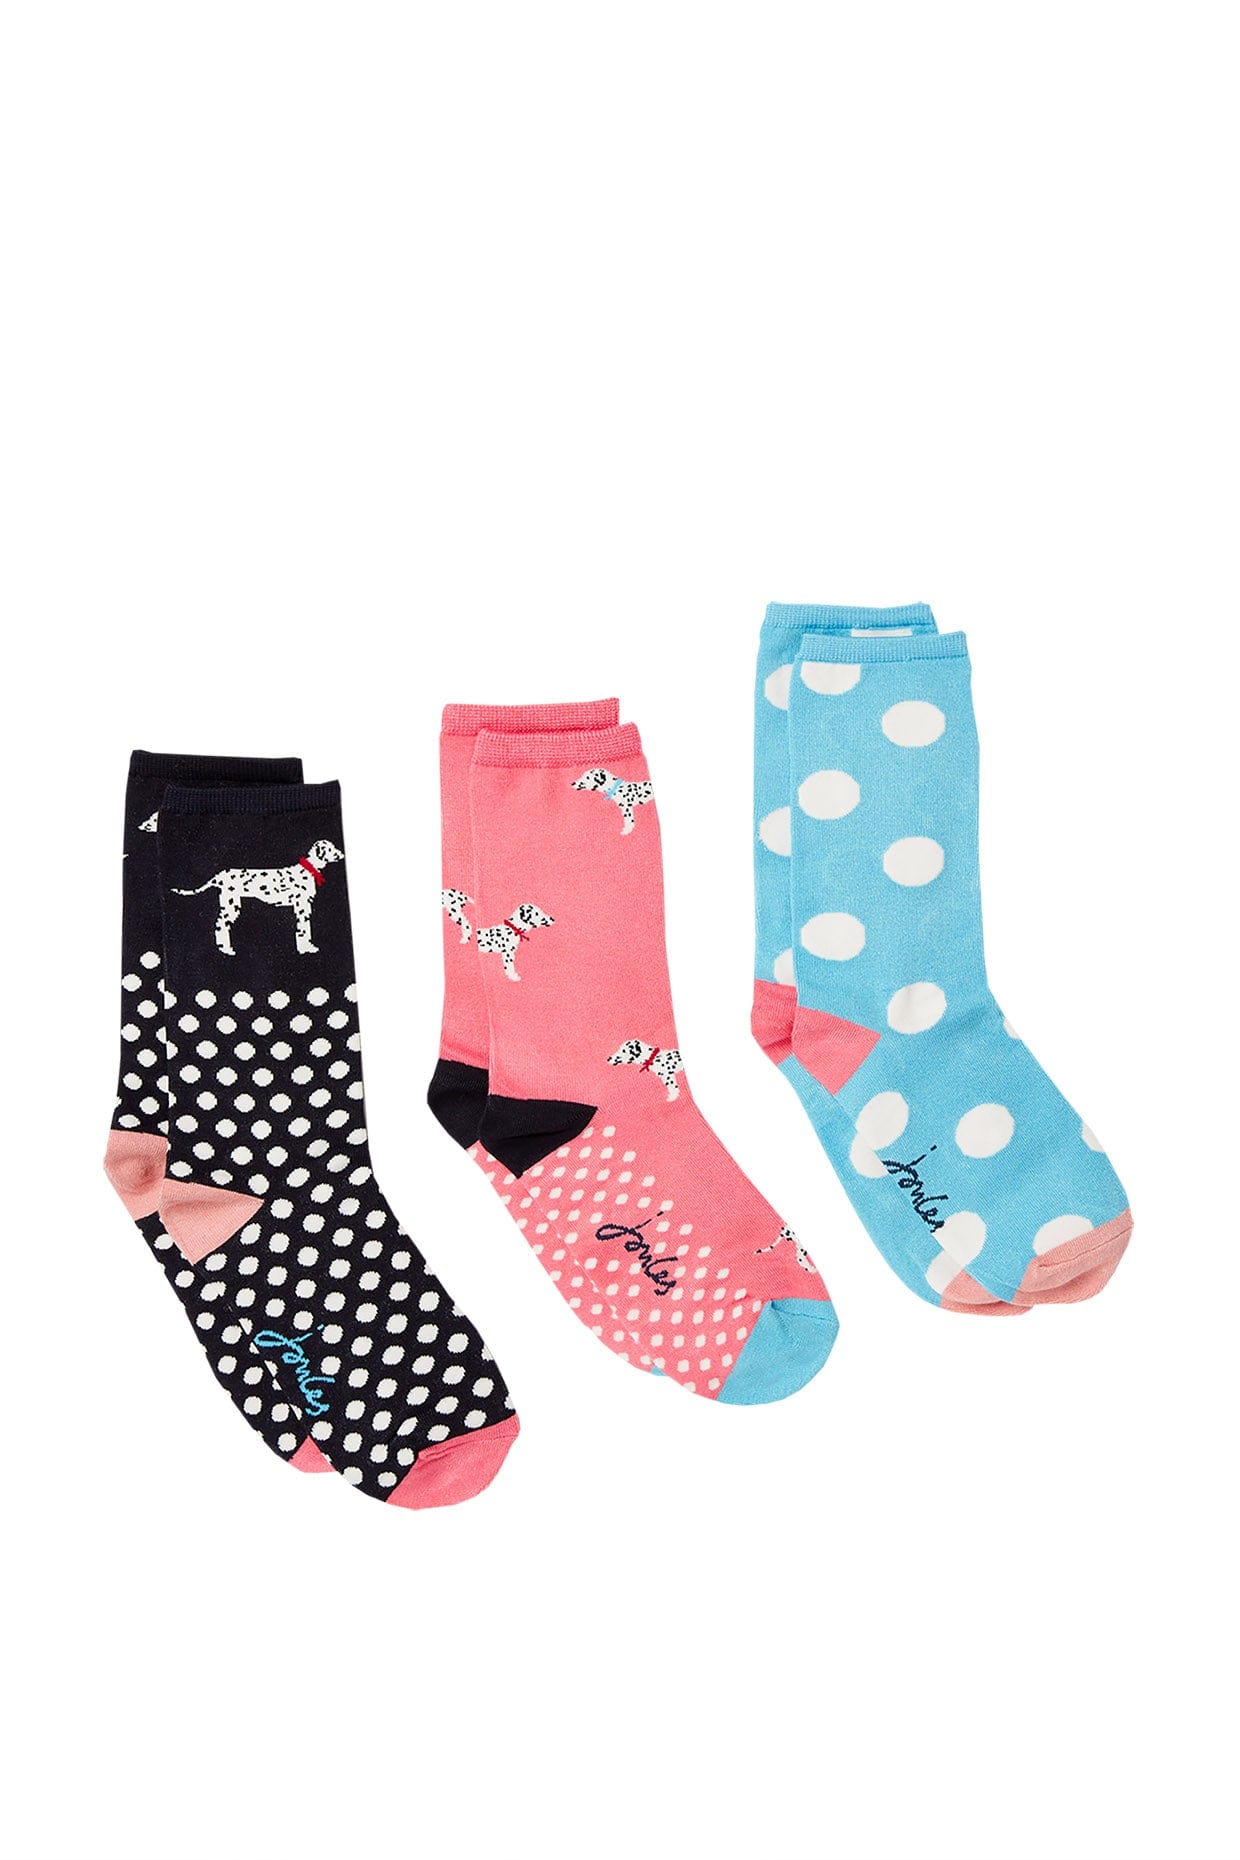 Joules Excellent Everyday 3 Pack Eco Vero Socks - Pink Dalmatian 217719_PINKDALM_4-8